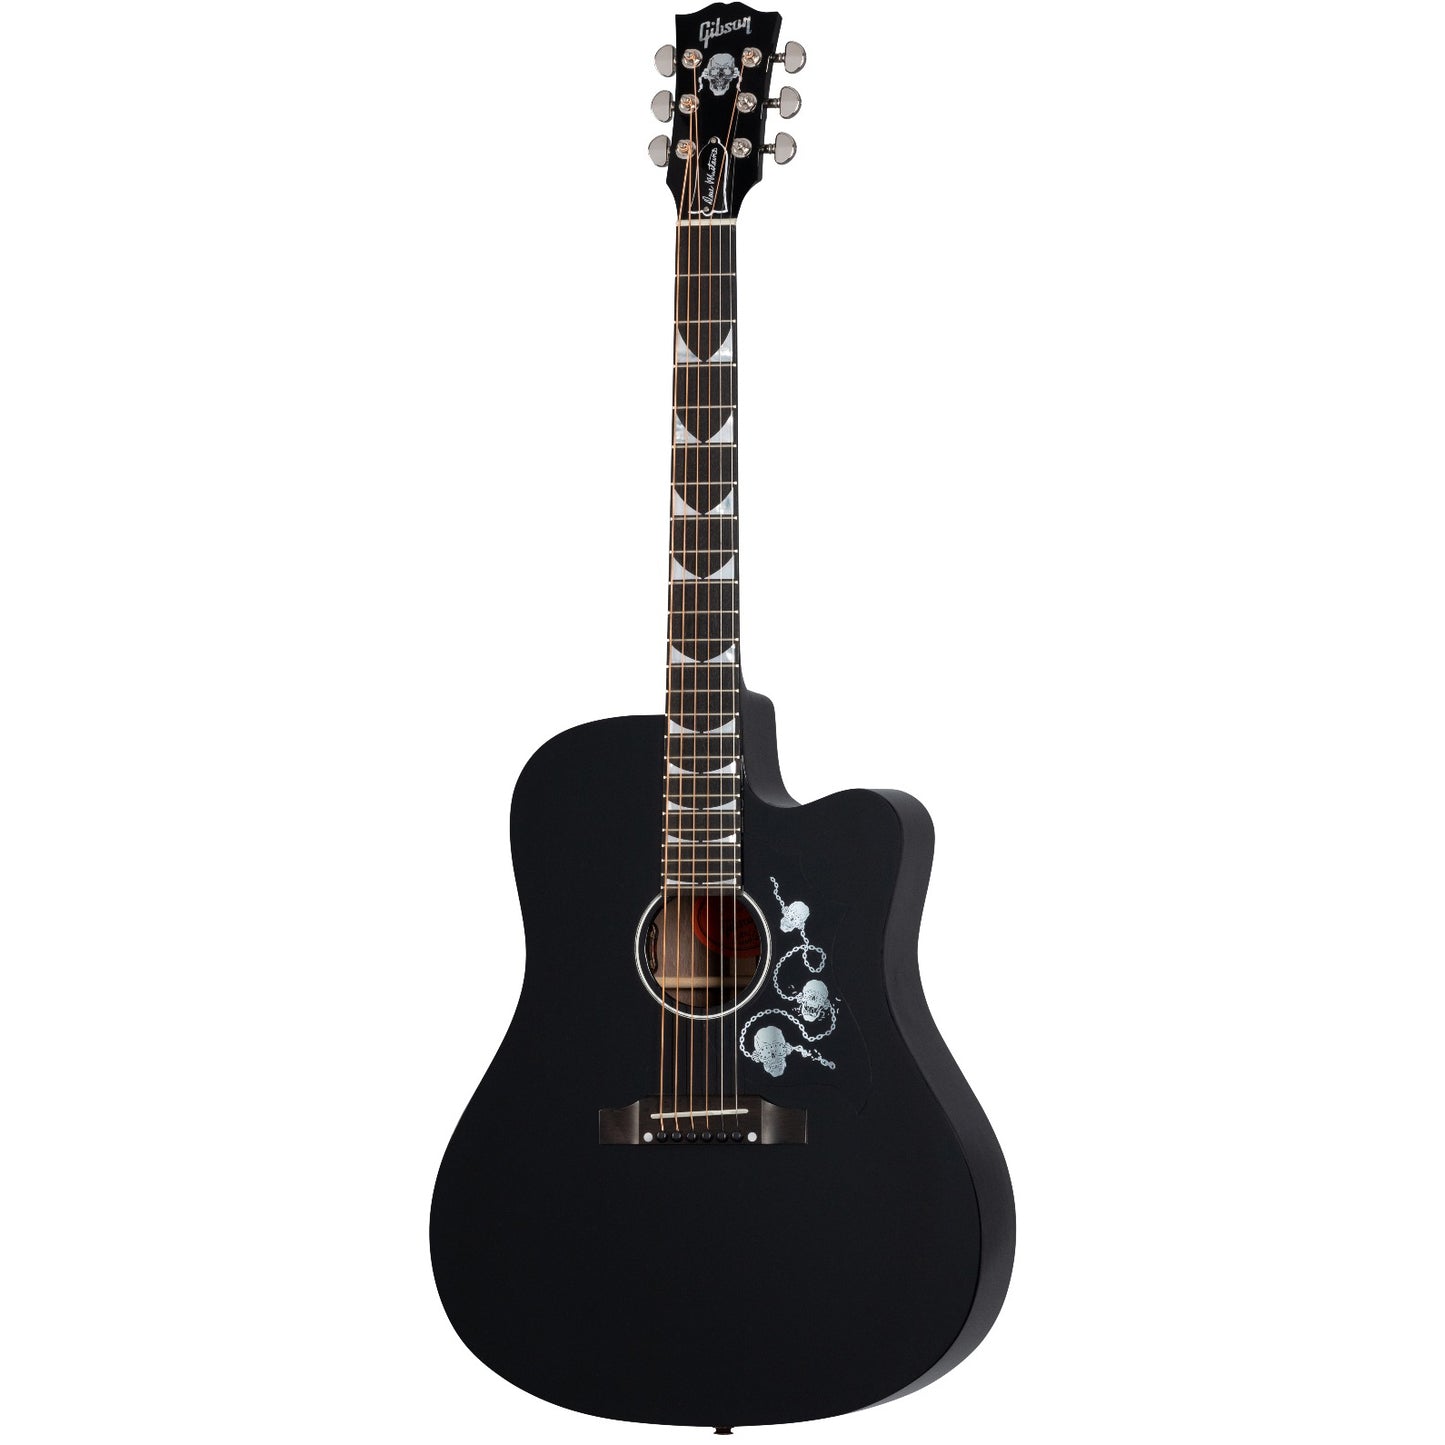 Gibson Dave Mustaine Songwriter Signature Acoustic Guitar